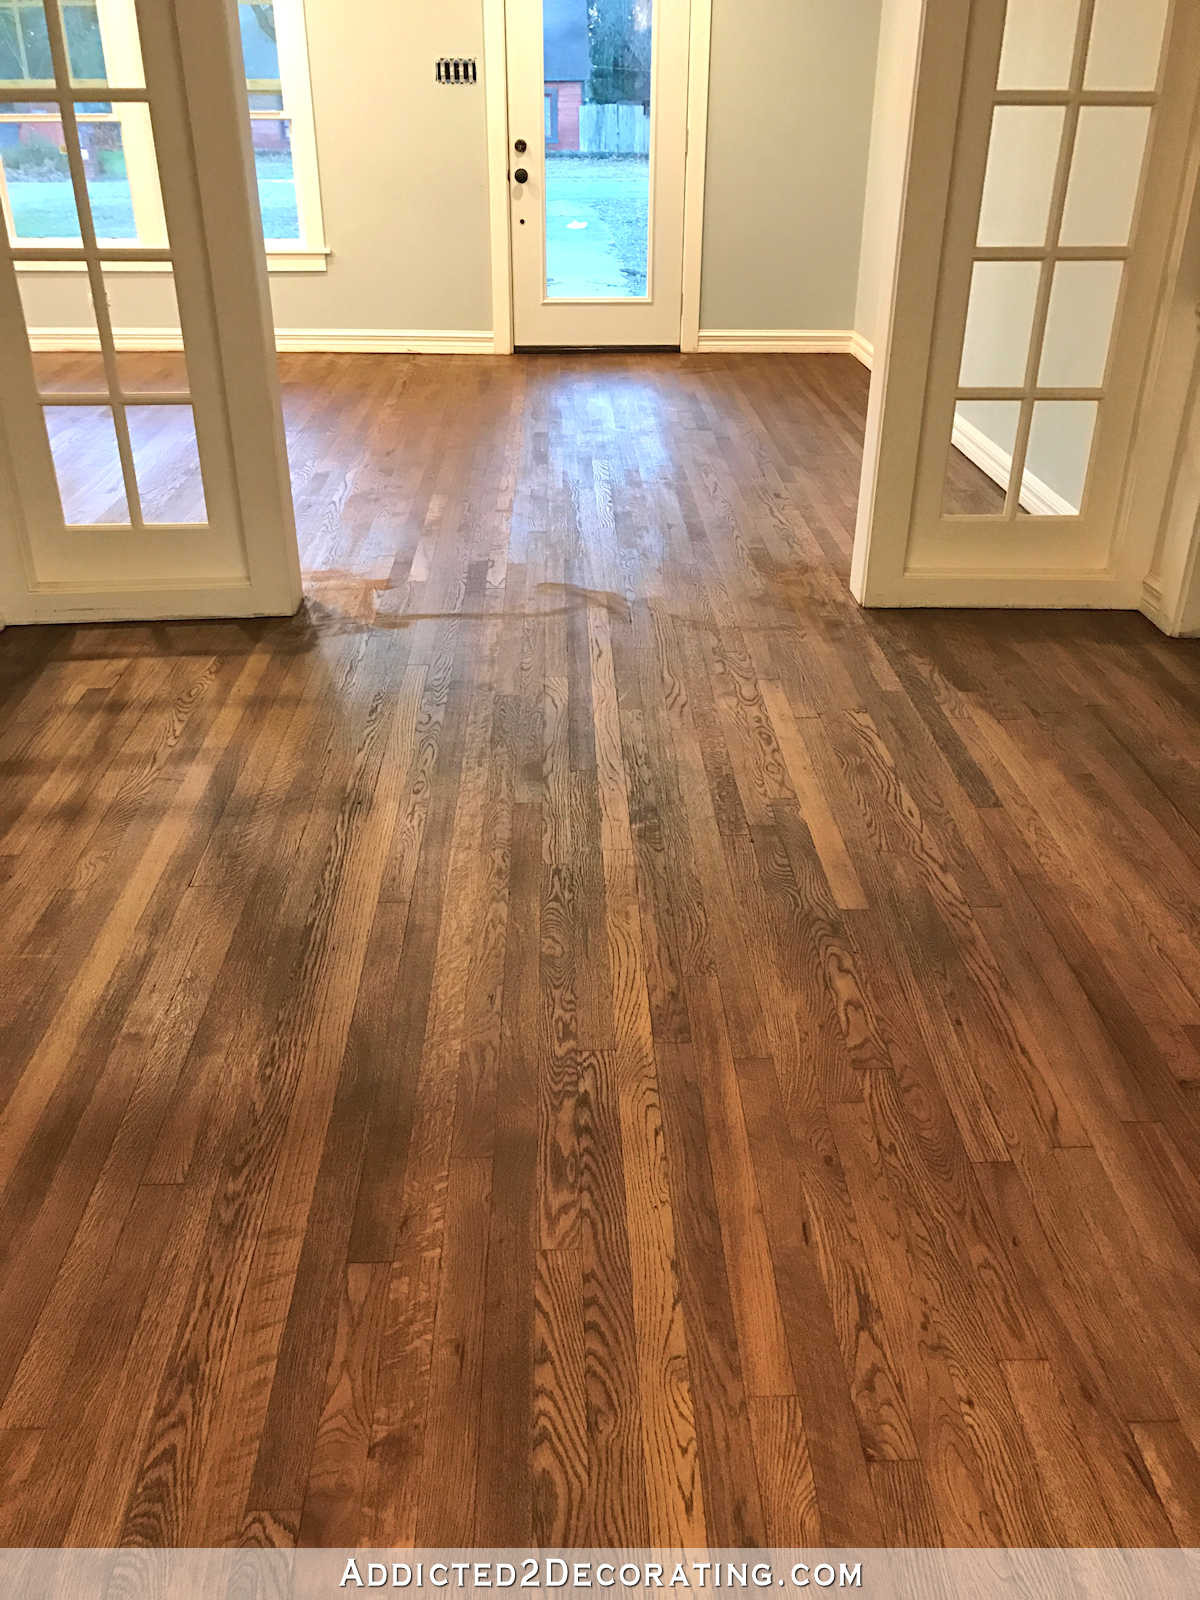 23 Ideal How to Restore Hardwood Floors Yourself 2022 free download how to restore hardwood floors yourself of adventures in staining my red oak hardwood floors products process with regard to staining red oak hardwood floors 9 stain on entryway and music ro